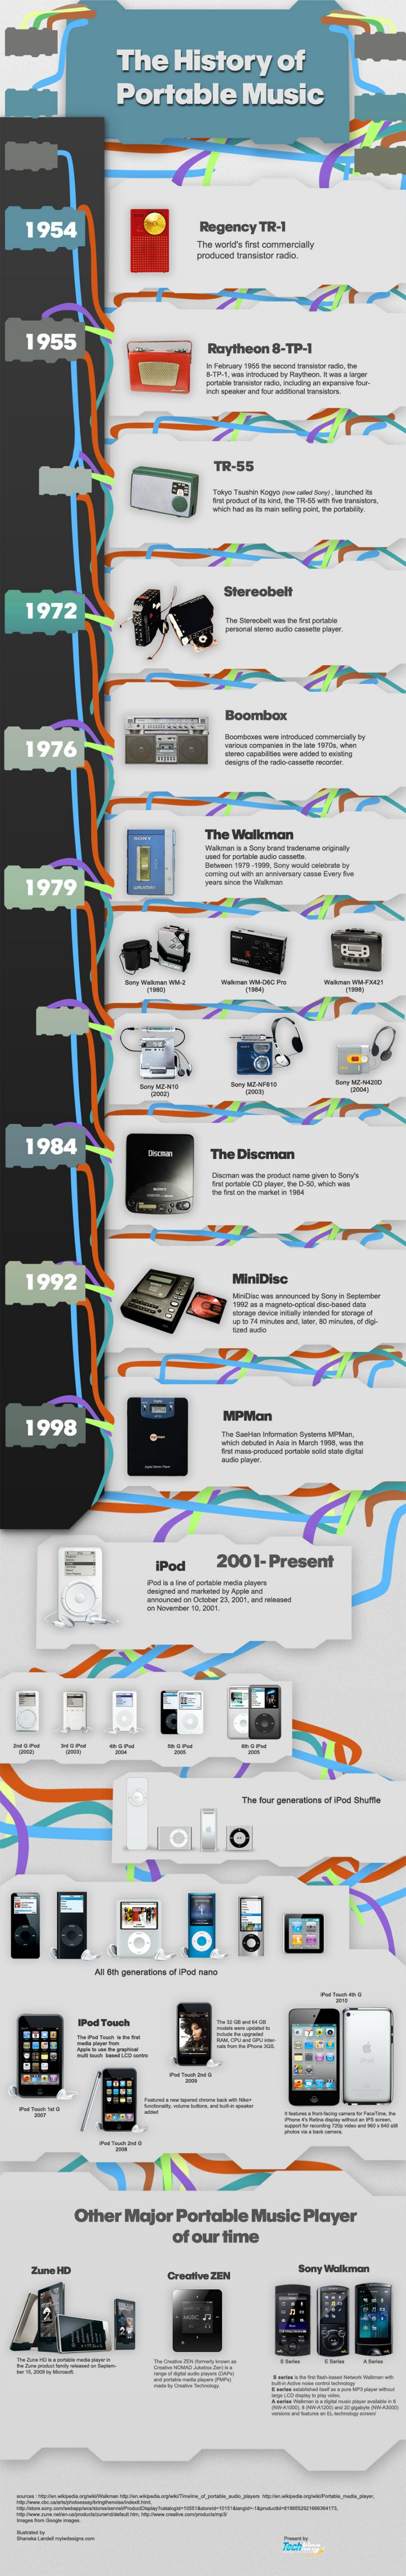 History Of Portable Music, An Infographic